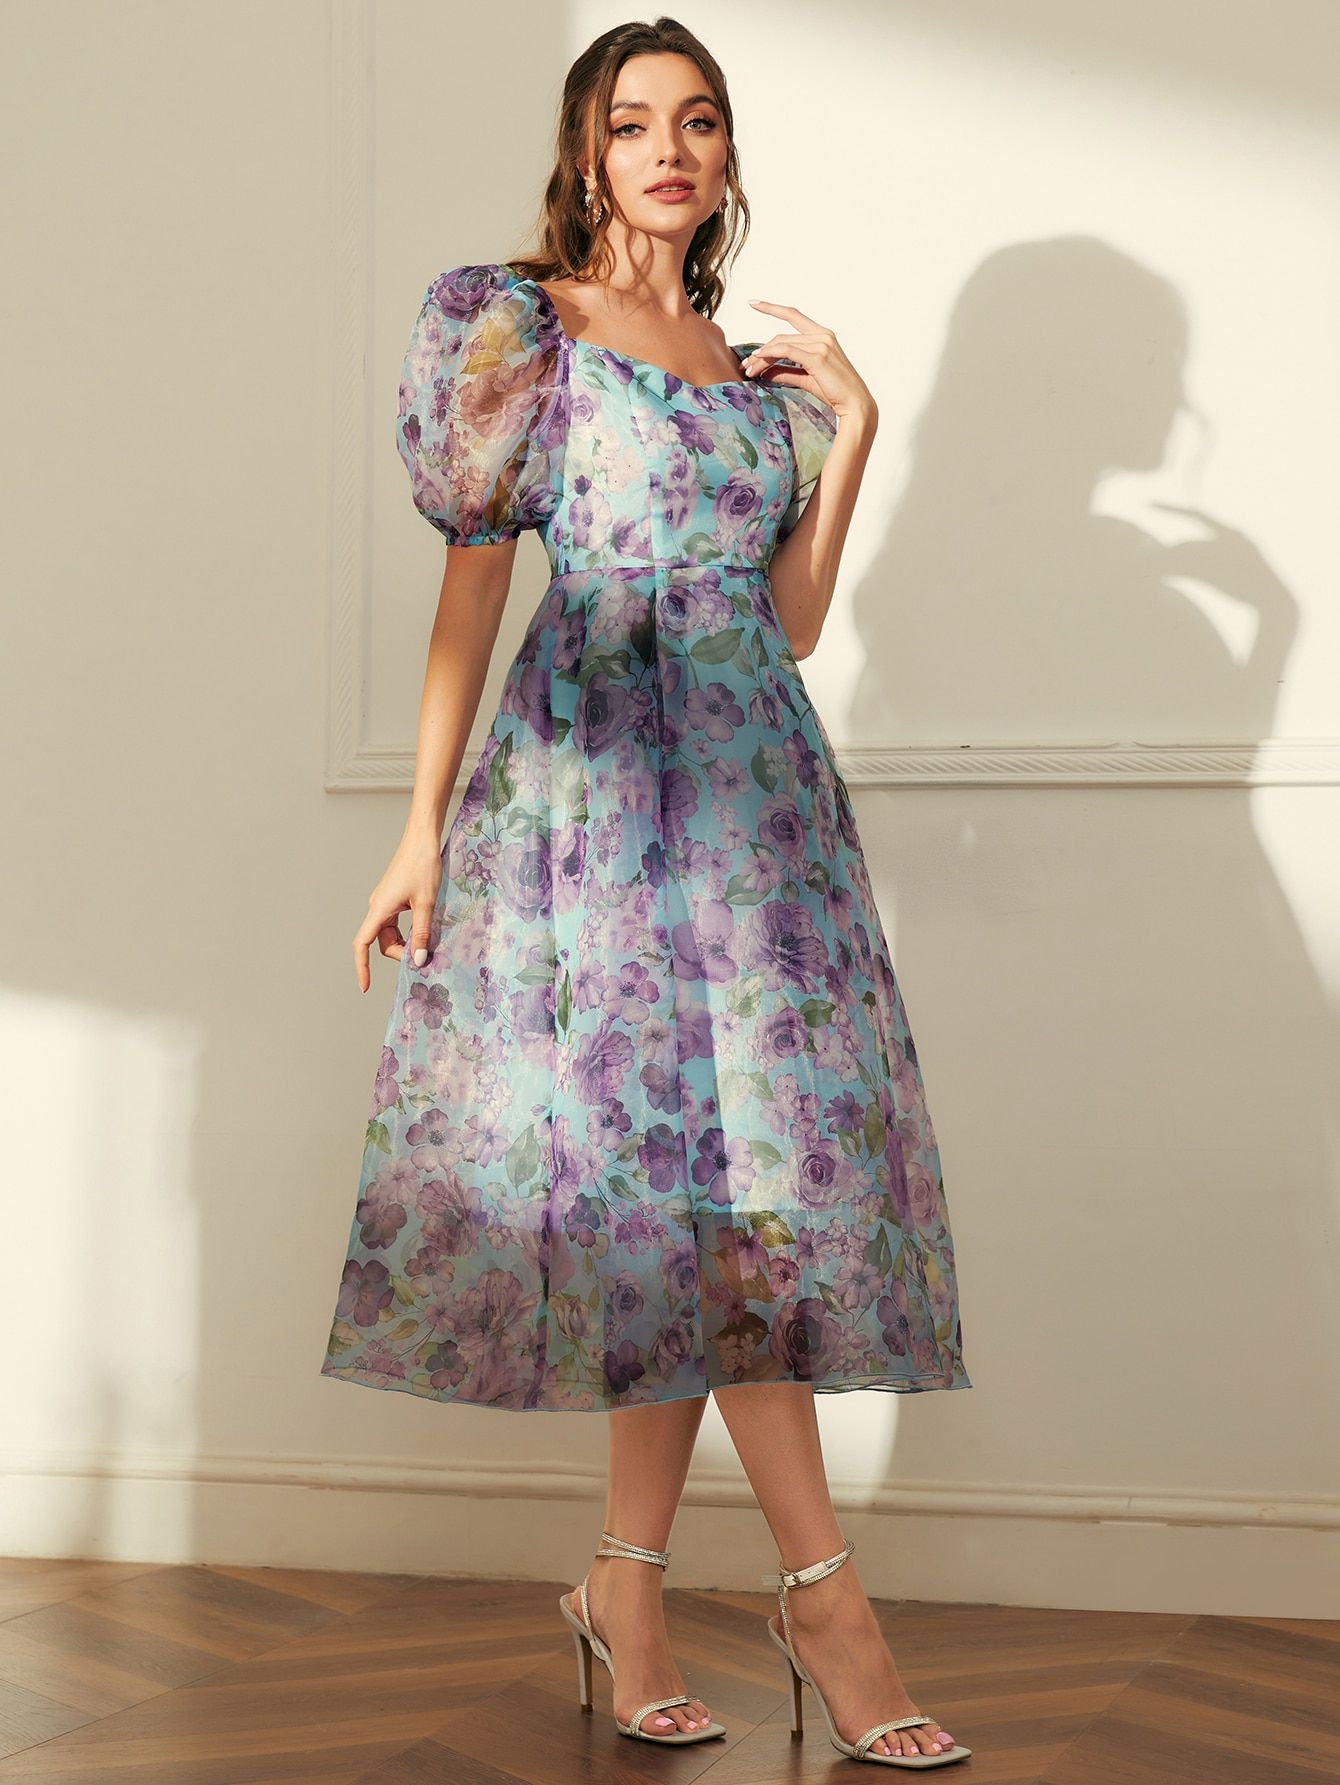 Explore the Latest Frock Designs: From Classic to Contemporary